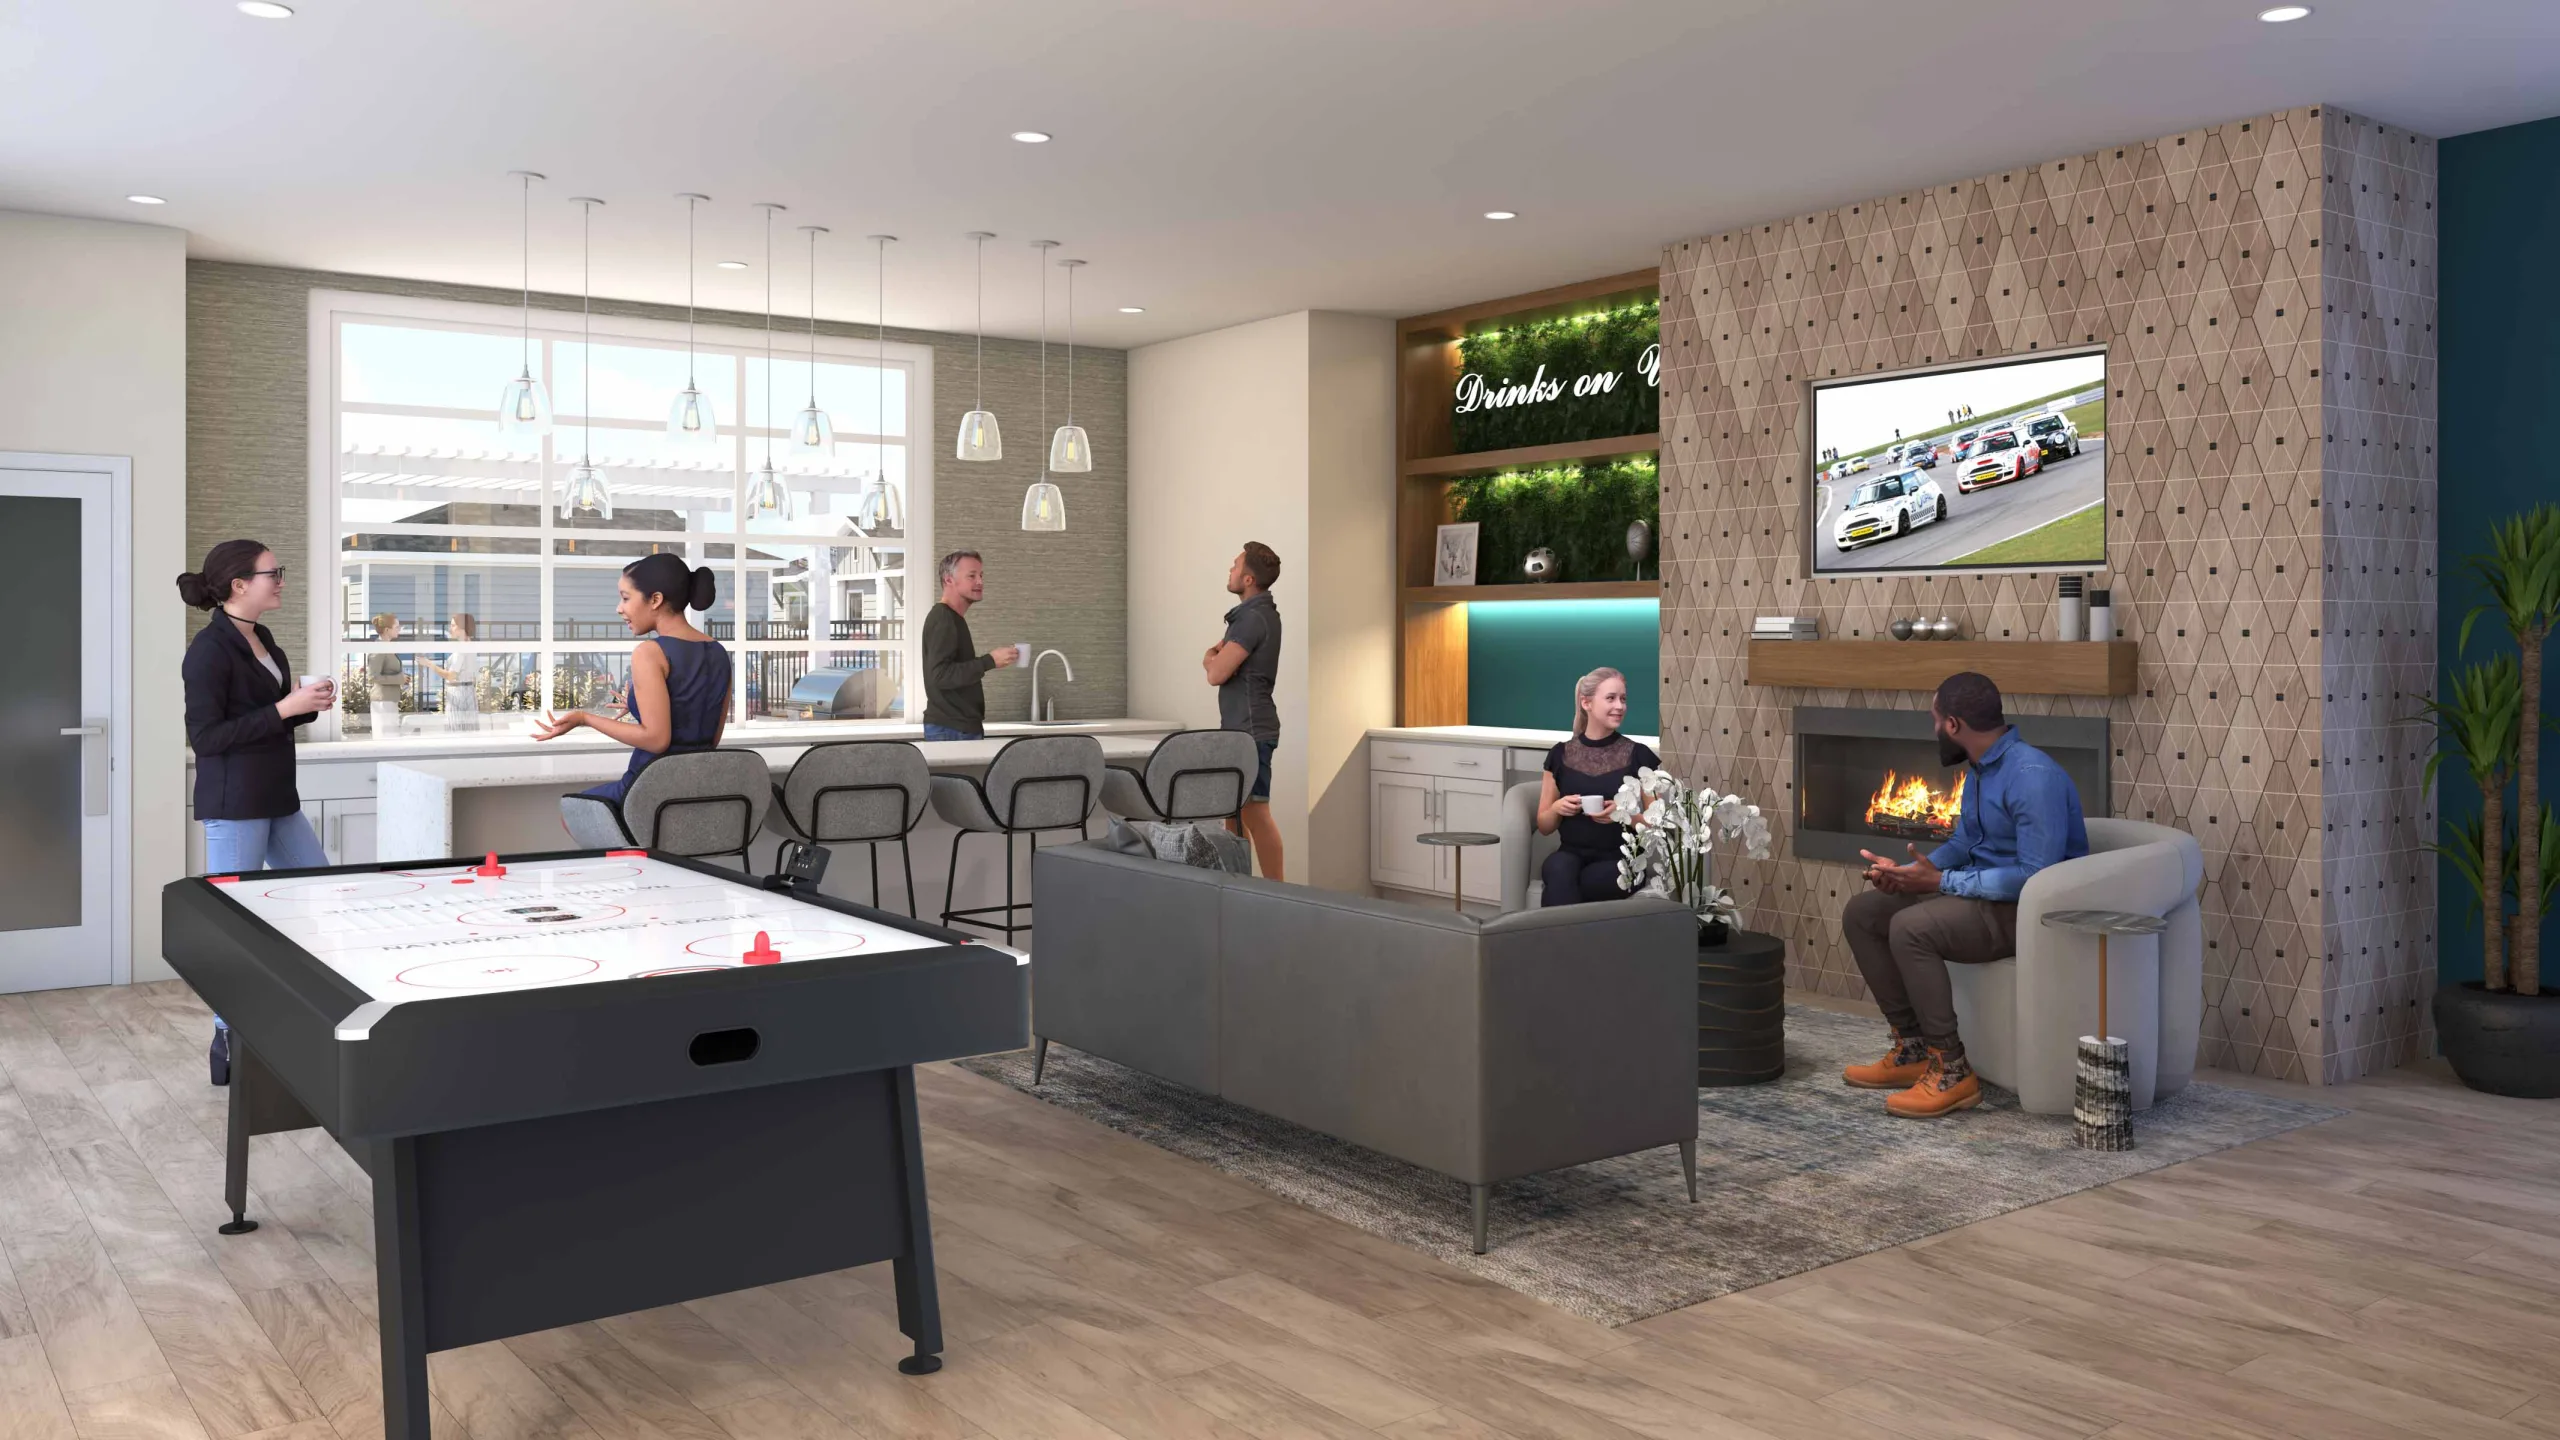 Clubhouse rendering of renters utilizing the clubhouse for hosting and visiting with friends. Renters at Yardly have full access to their clubhouse.